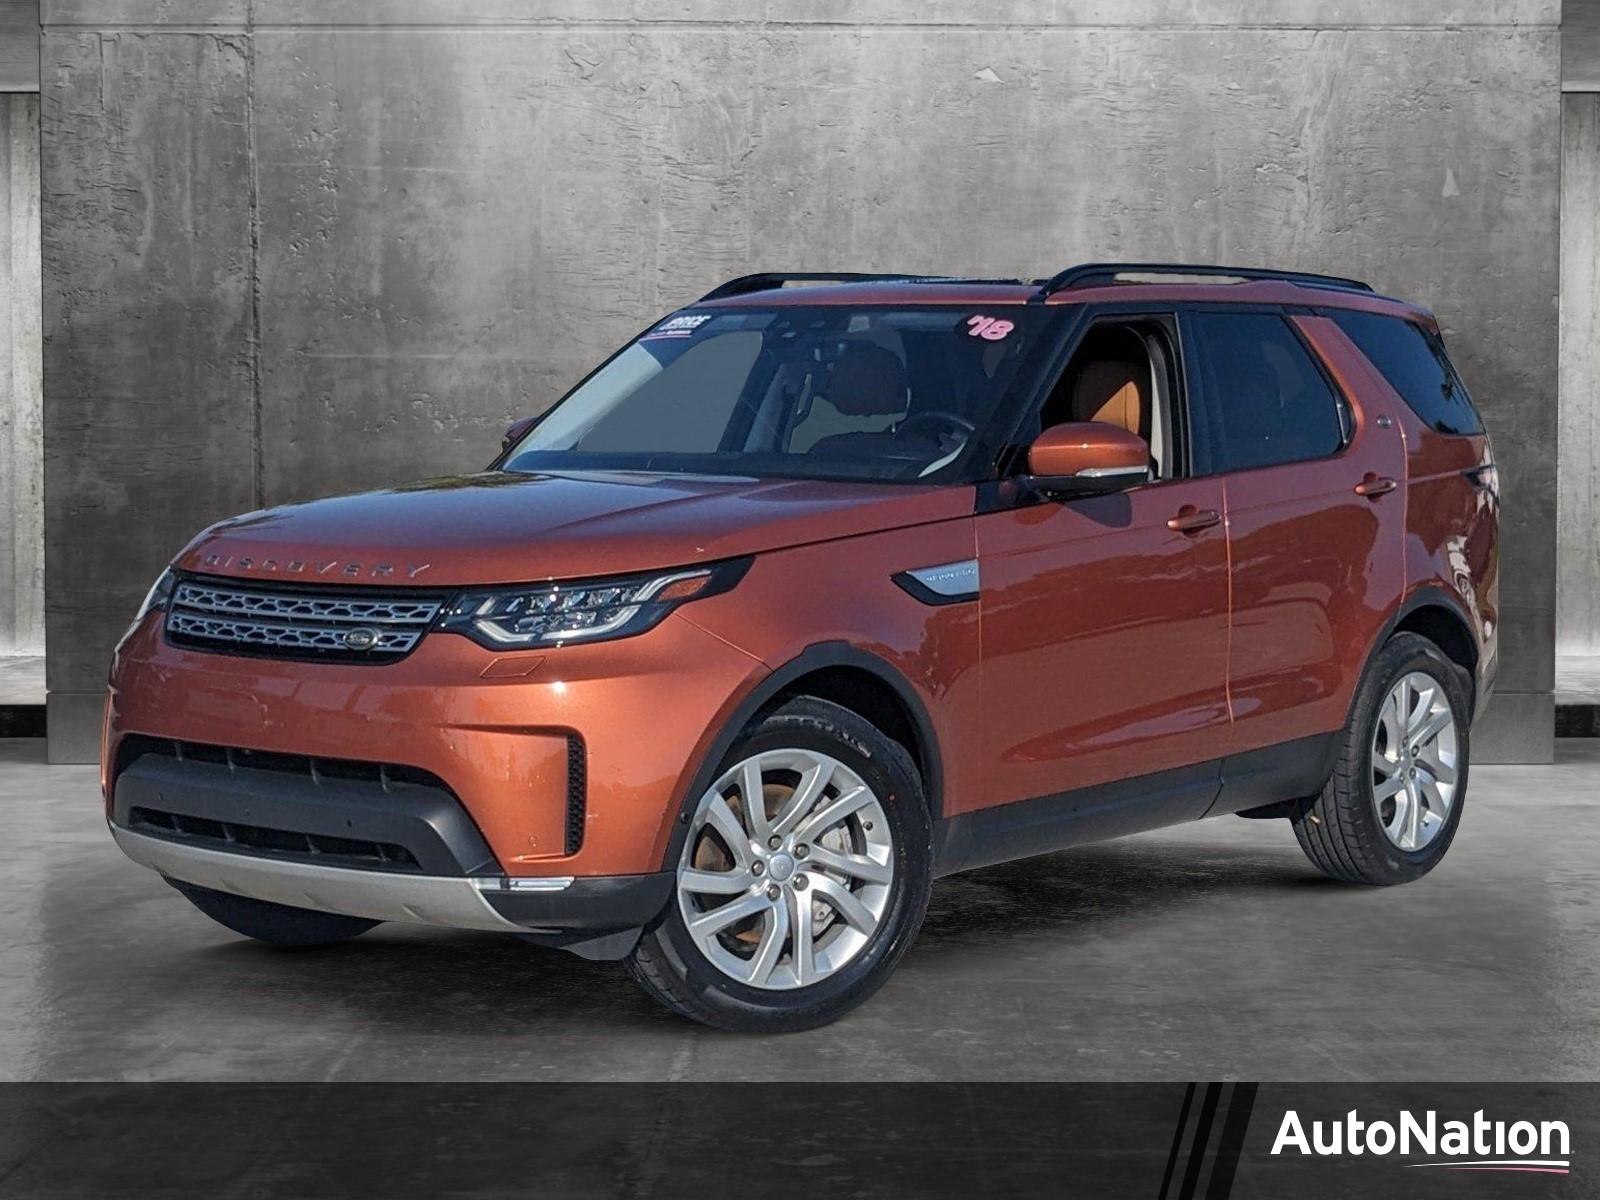 2018 Land Rover Discovery Vehicle Photo in Margate, FL 33063